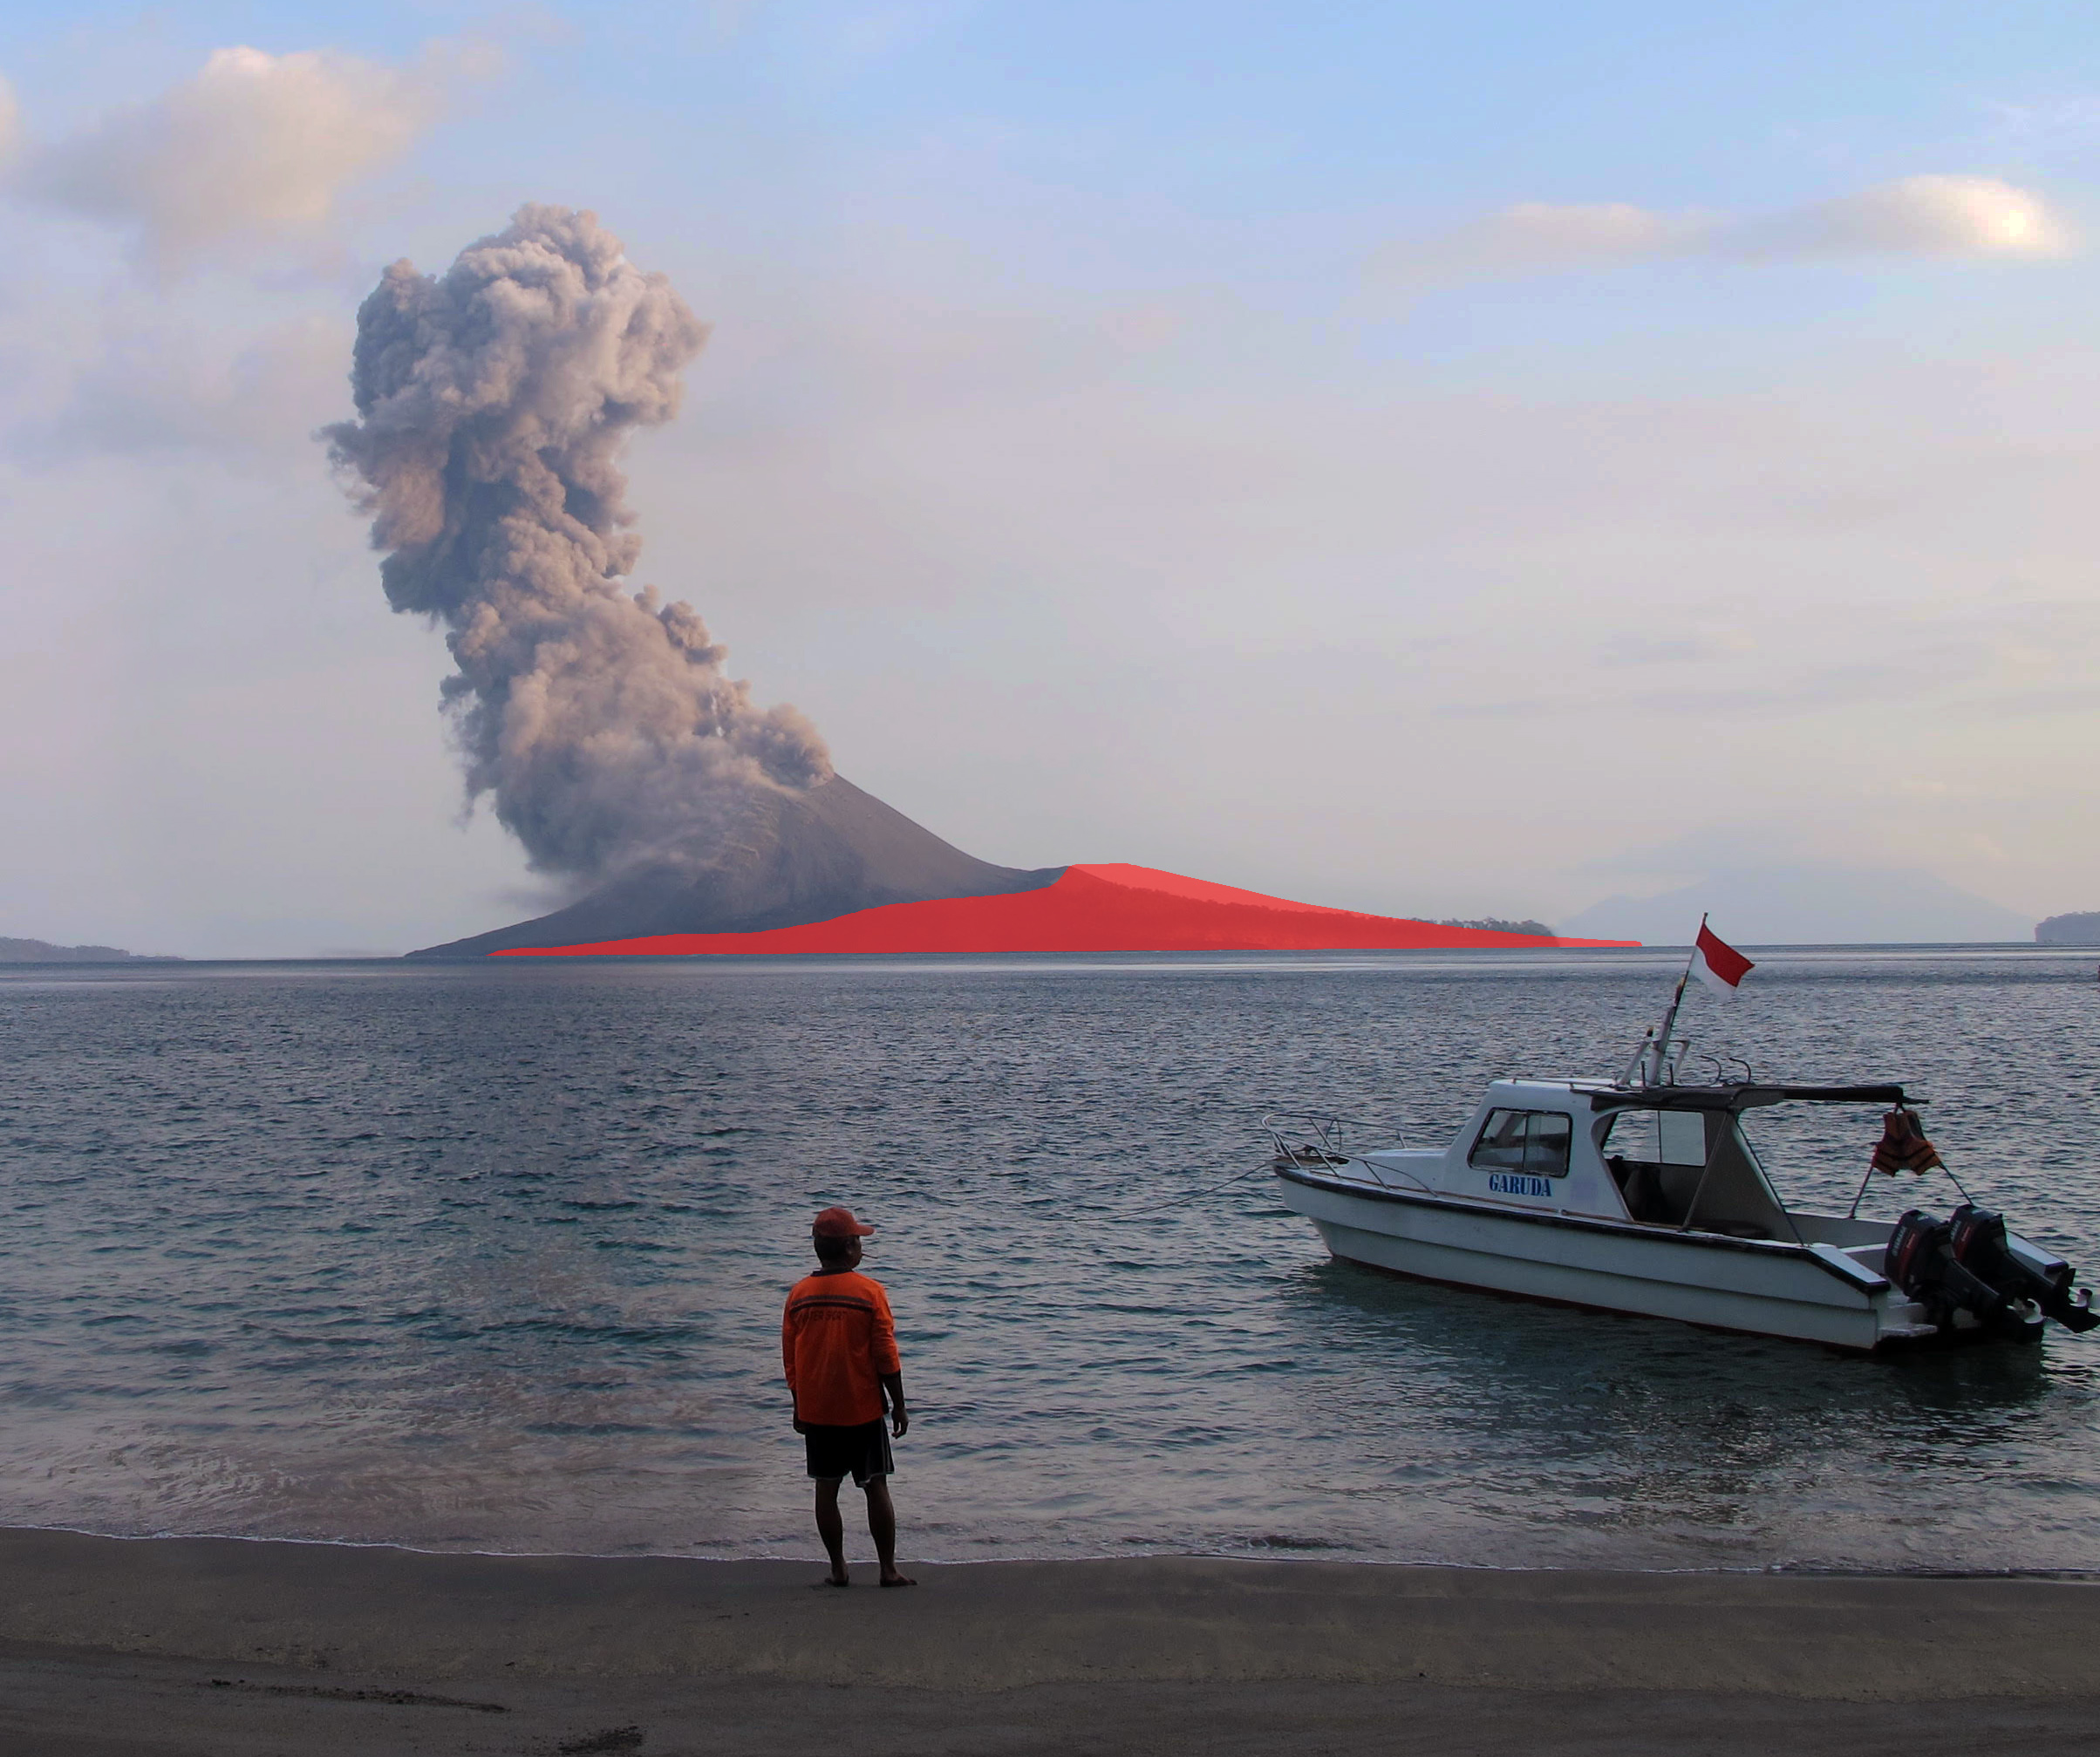 The collapse of Anak Krakatau’s cone left a much smaller edifice (marked in red) in its place (Source: Anna Perttu & Brian Perttu/Earth Observatory of Singapore)